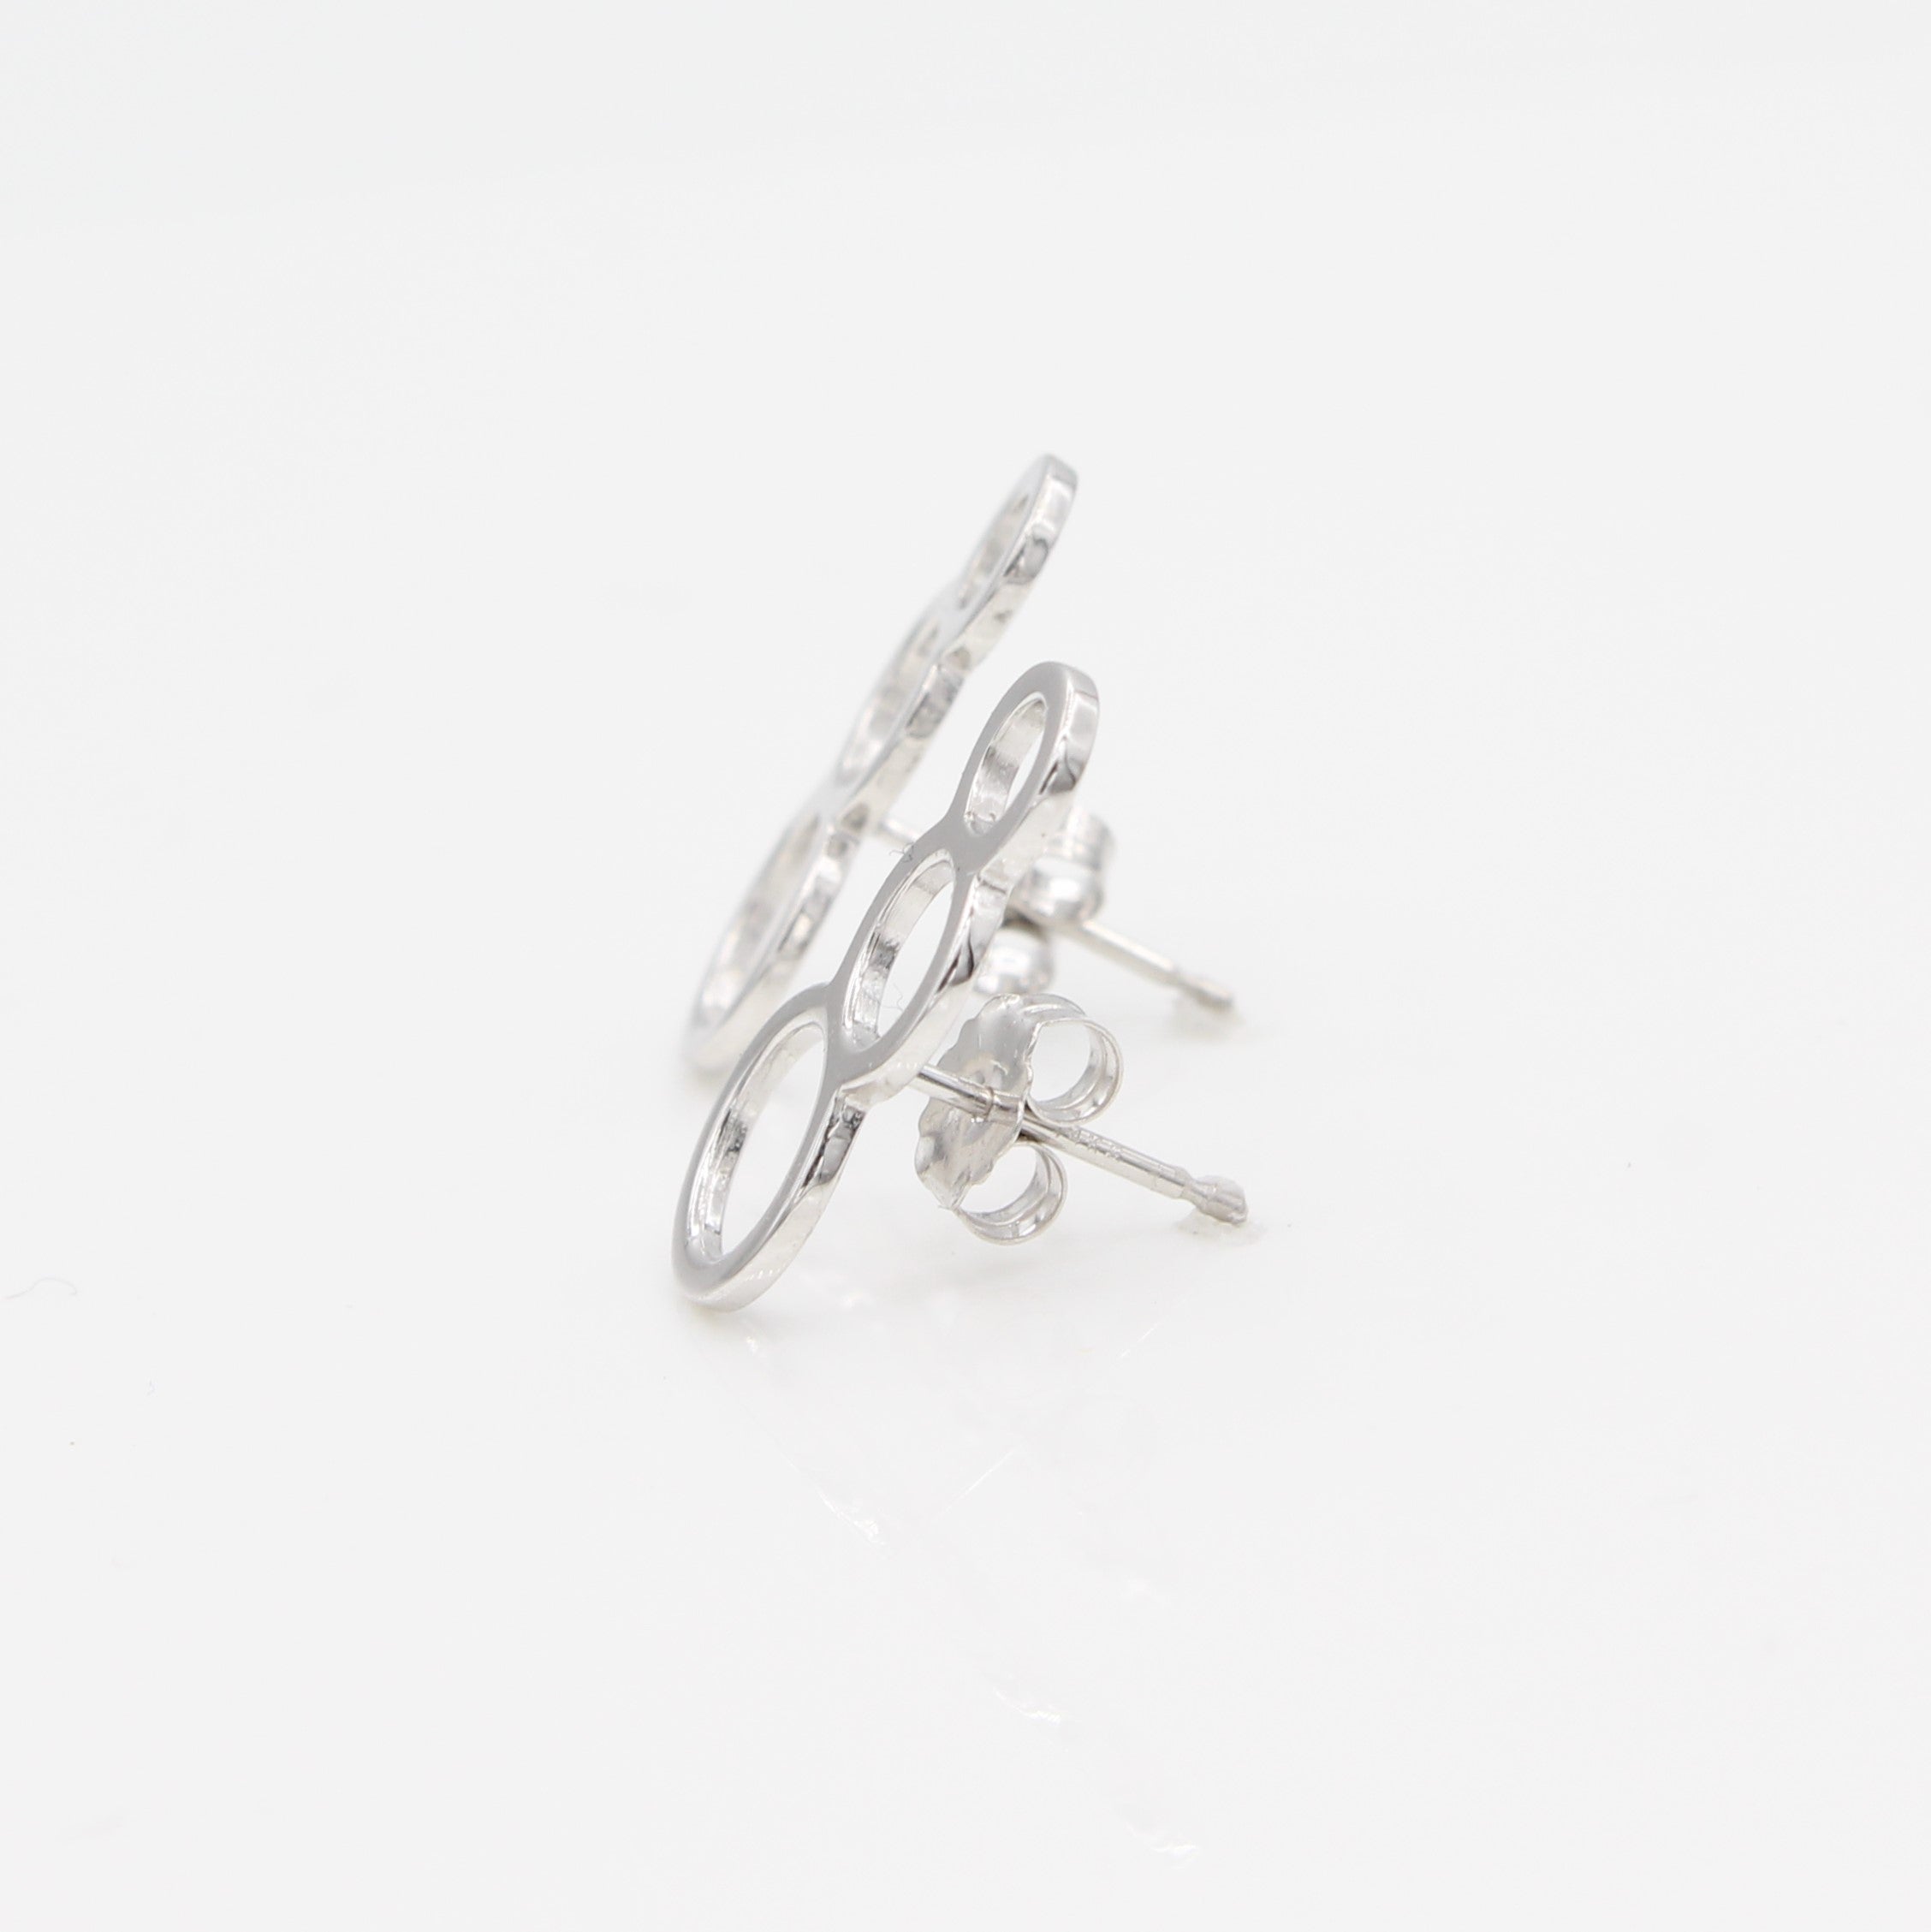 14k White Gold Bubble Ear Climbers Earrings with Posts, Side View